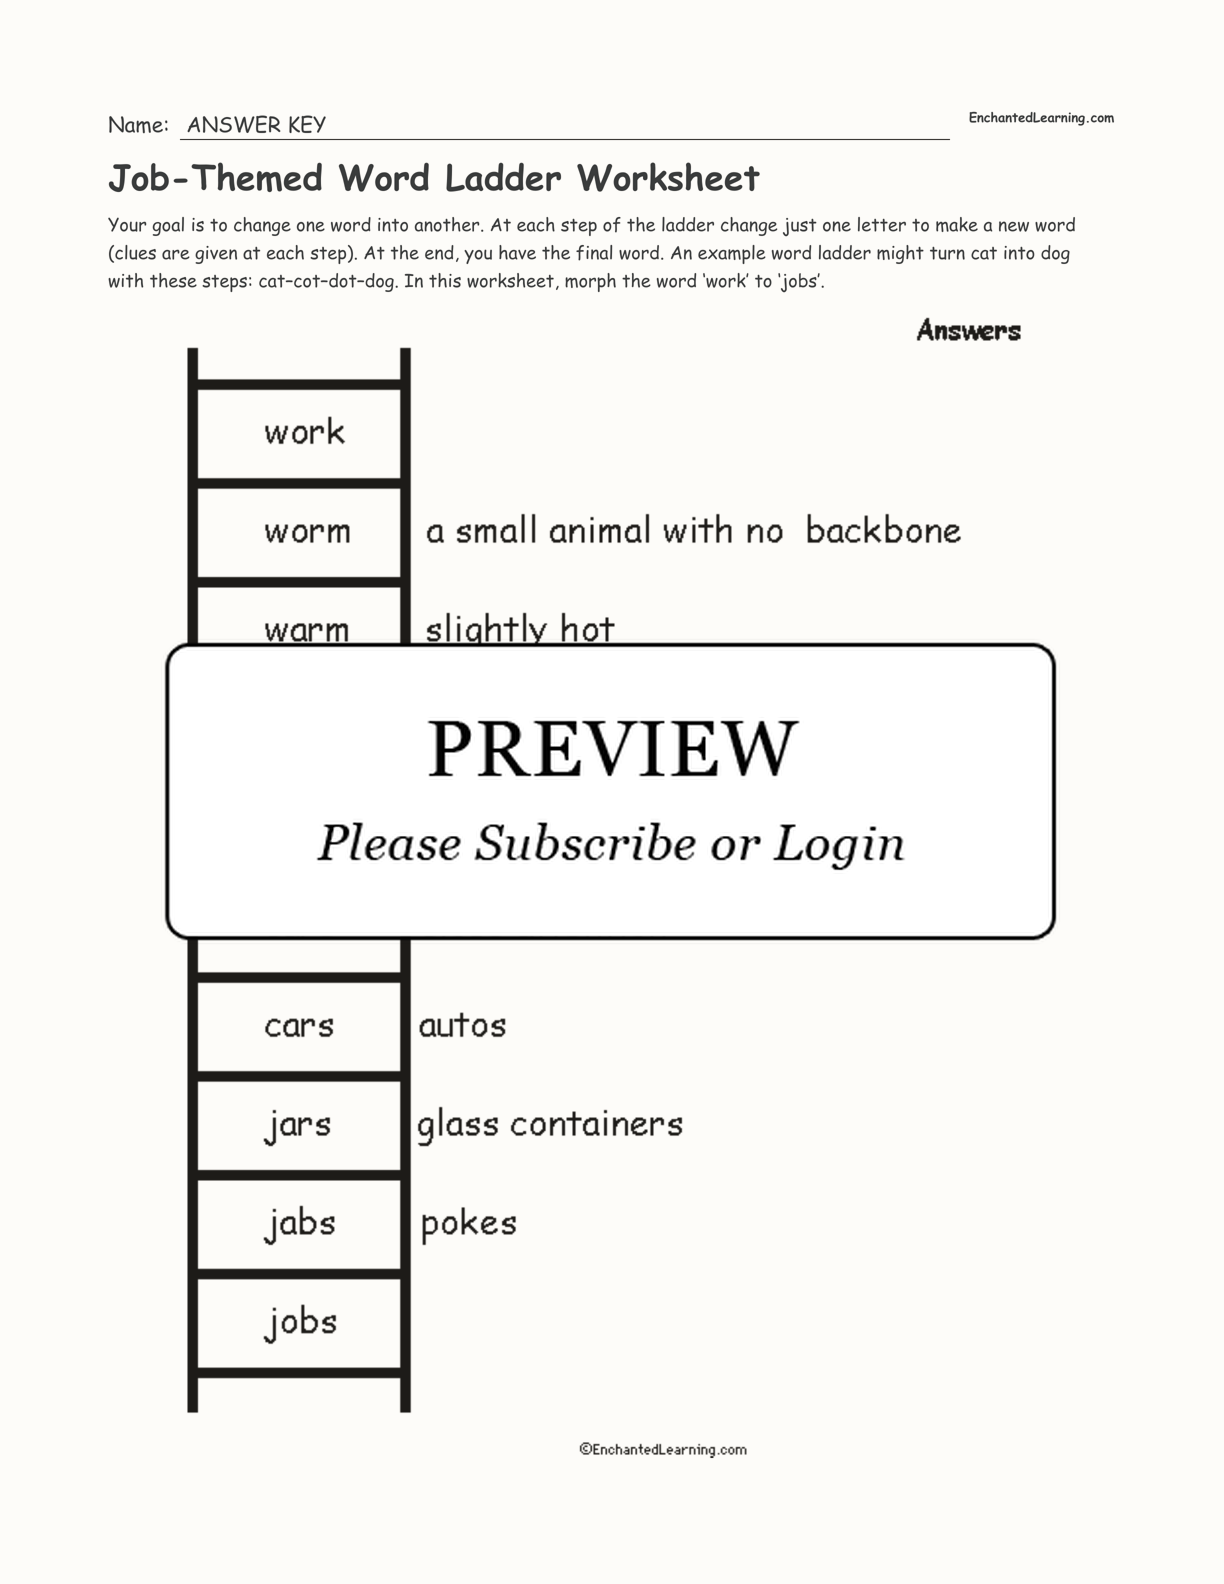 how-can-you-order-a-ladder-worksheet-that-s-entertainment-word-ladder-grades-4-6-printables